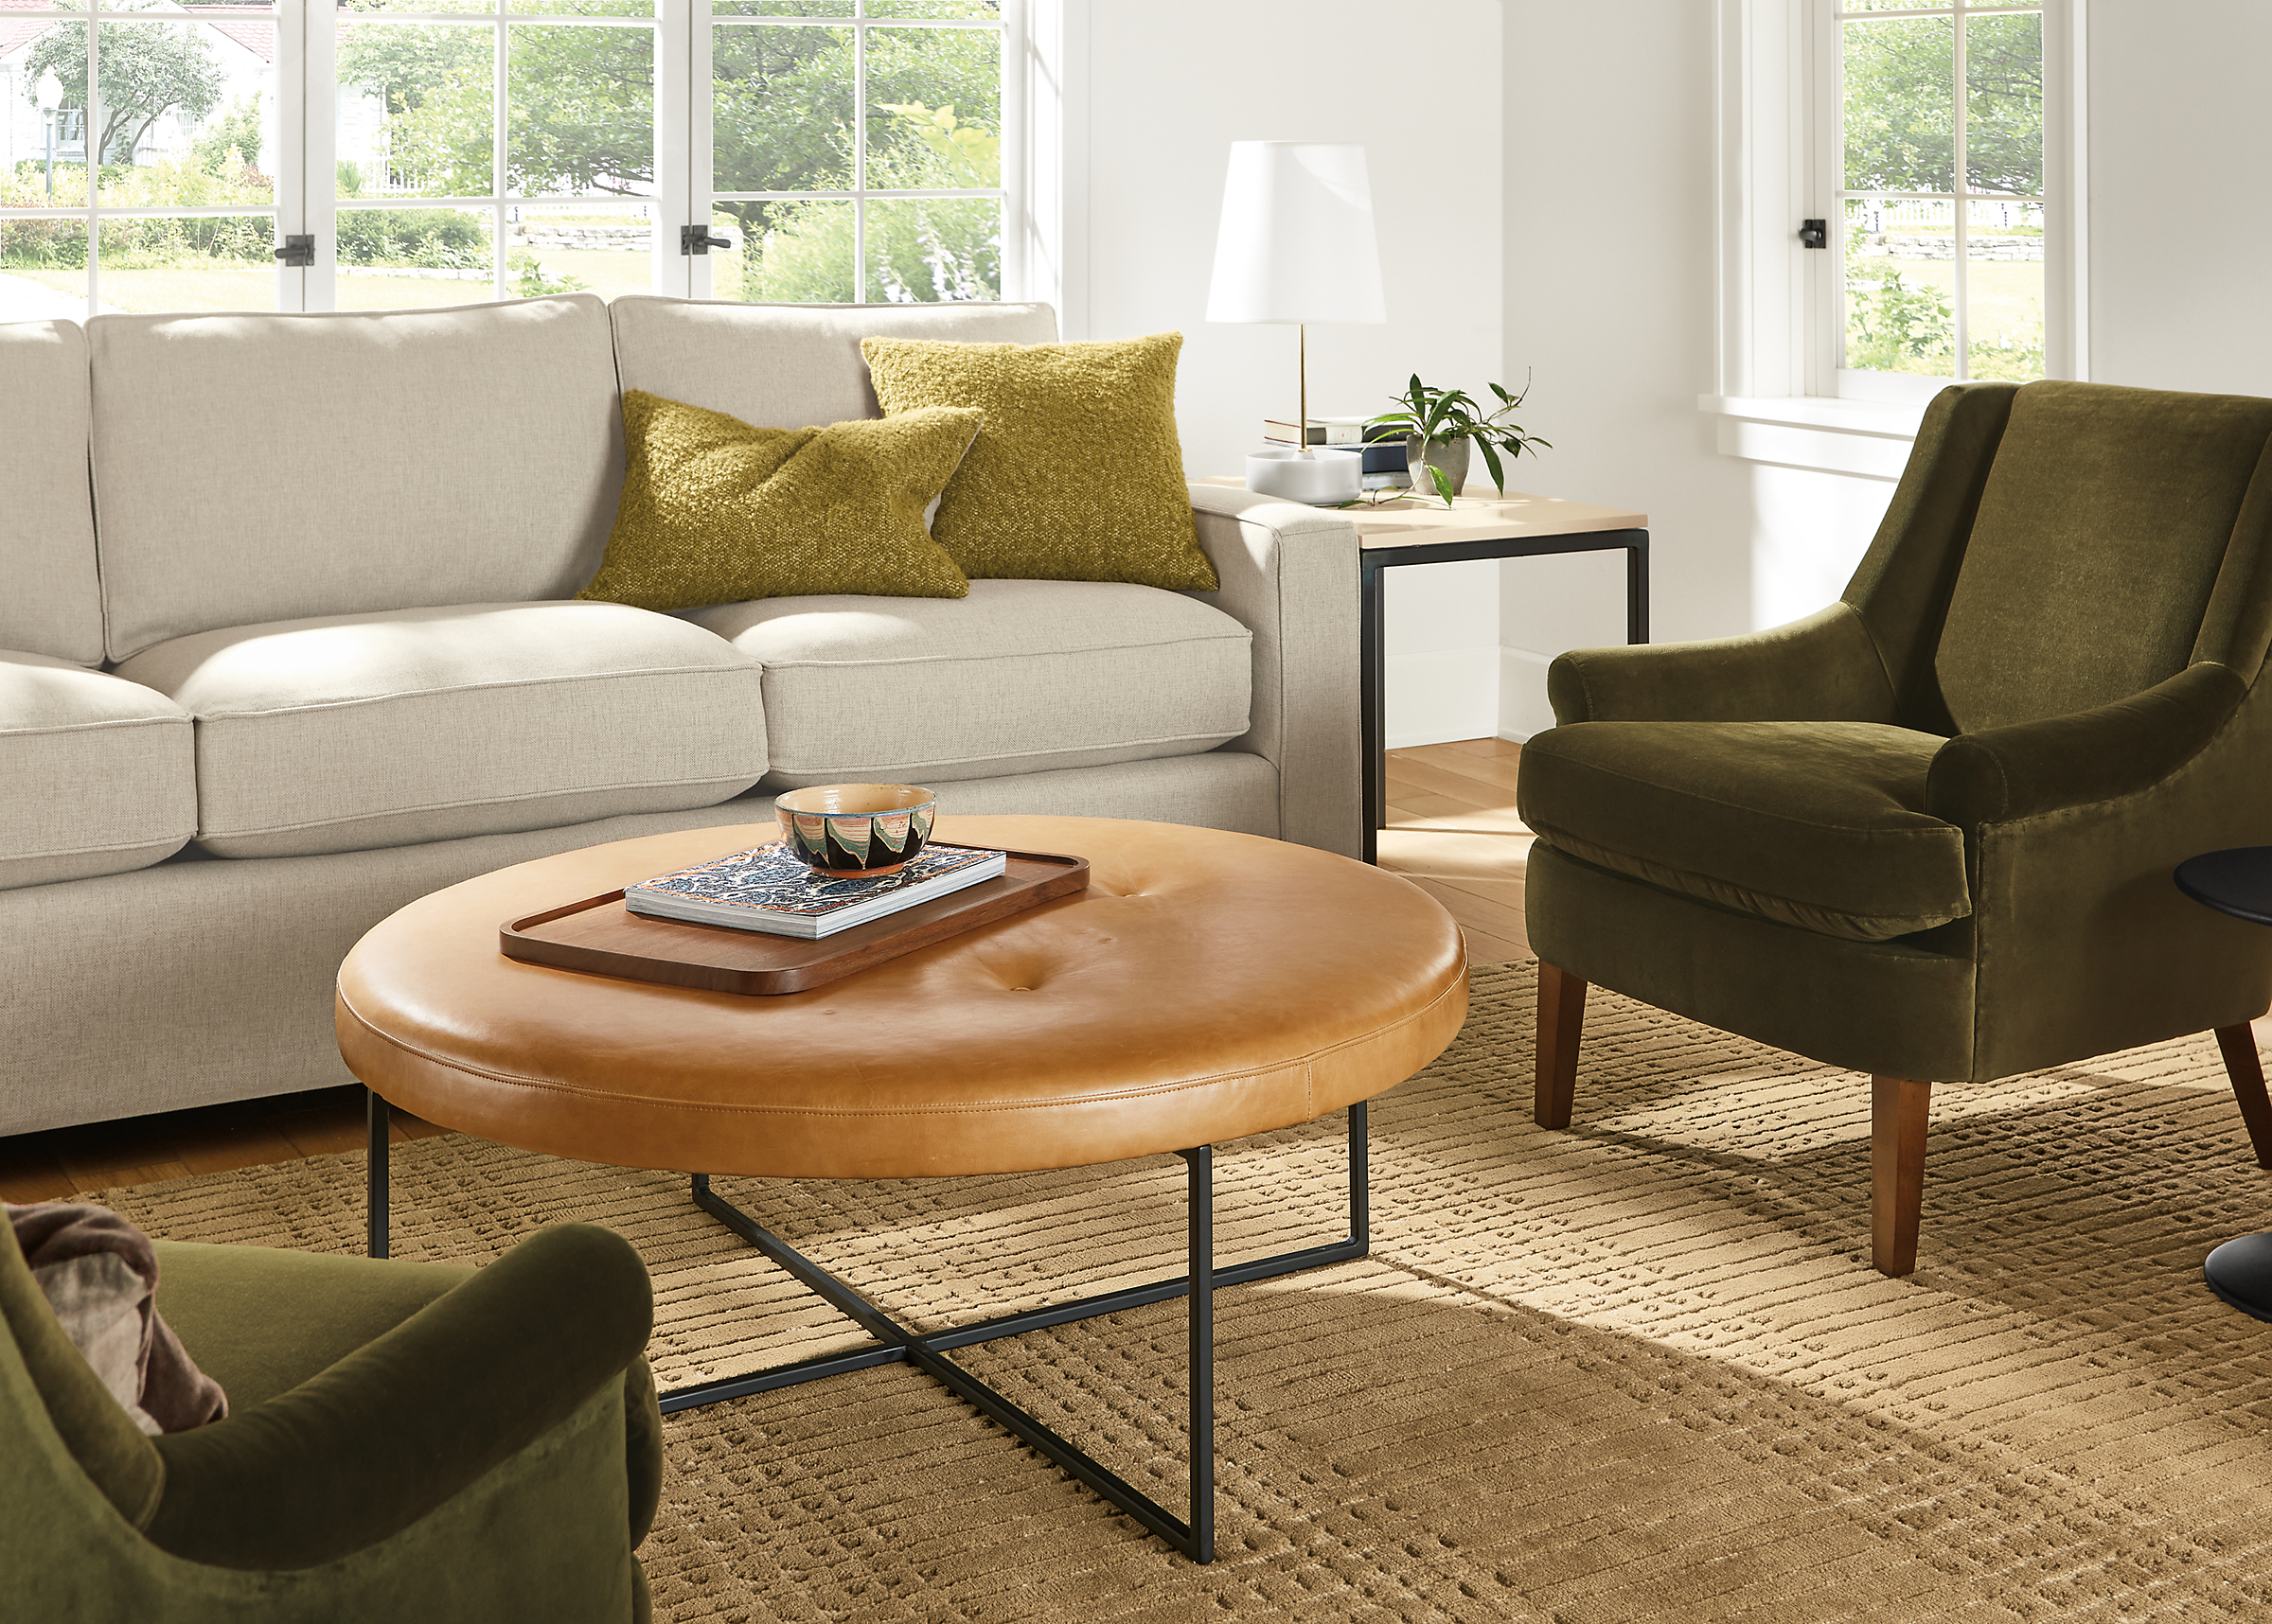 Living room with Sidney ottoman in leather, Louise chairs in Vance olive and York sofa in Sumner linen.